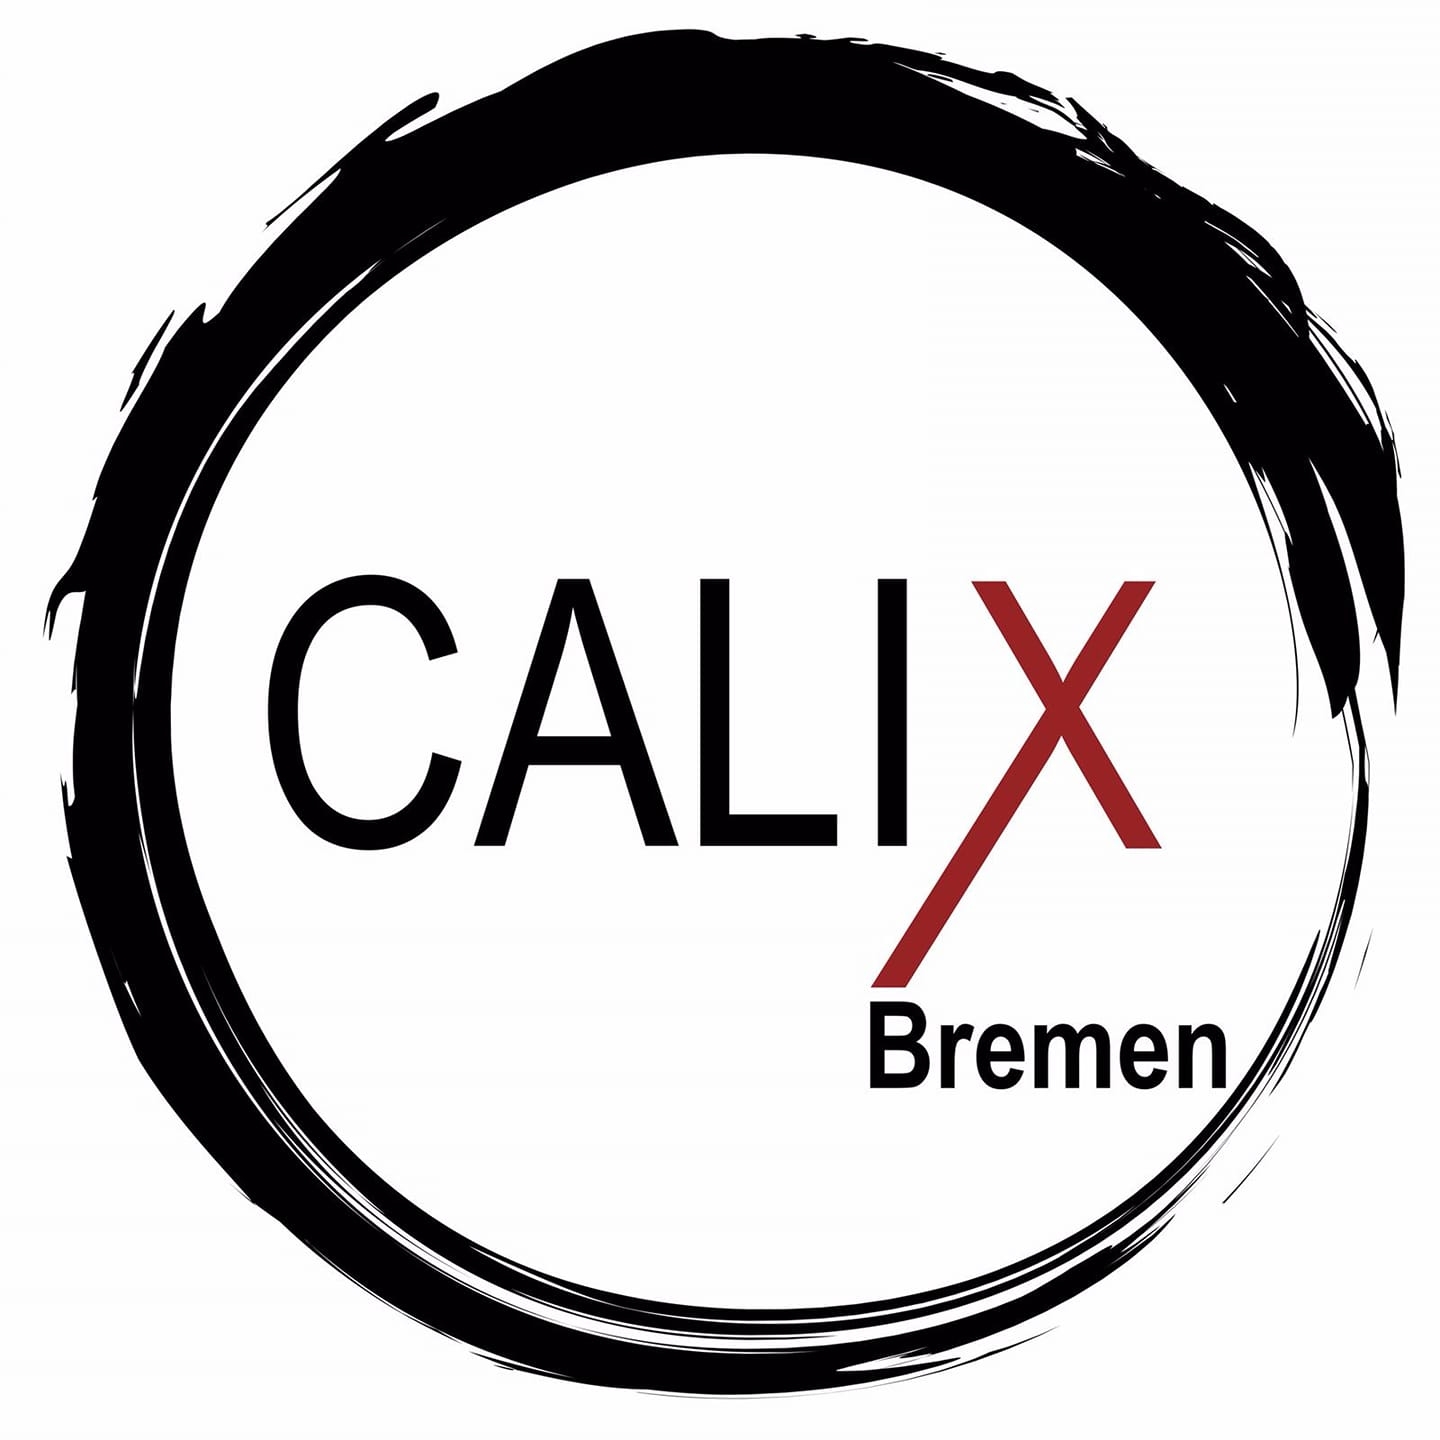 You are currently viewing Calisthenics Bremen